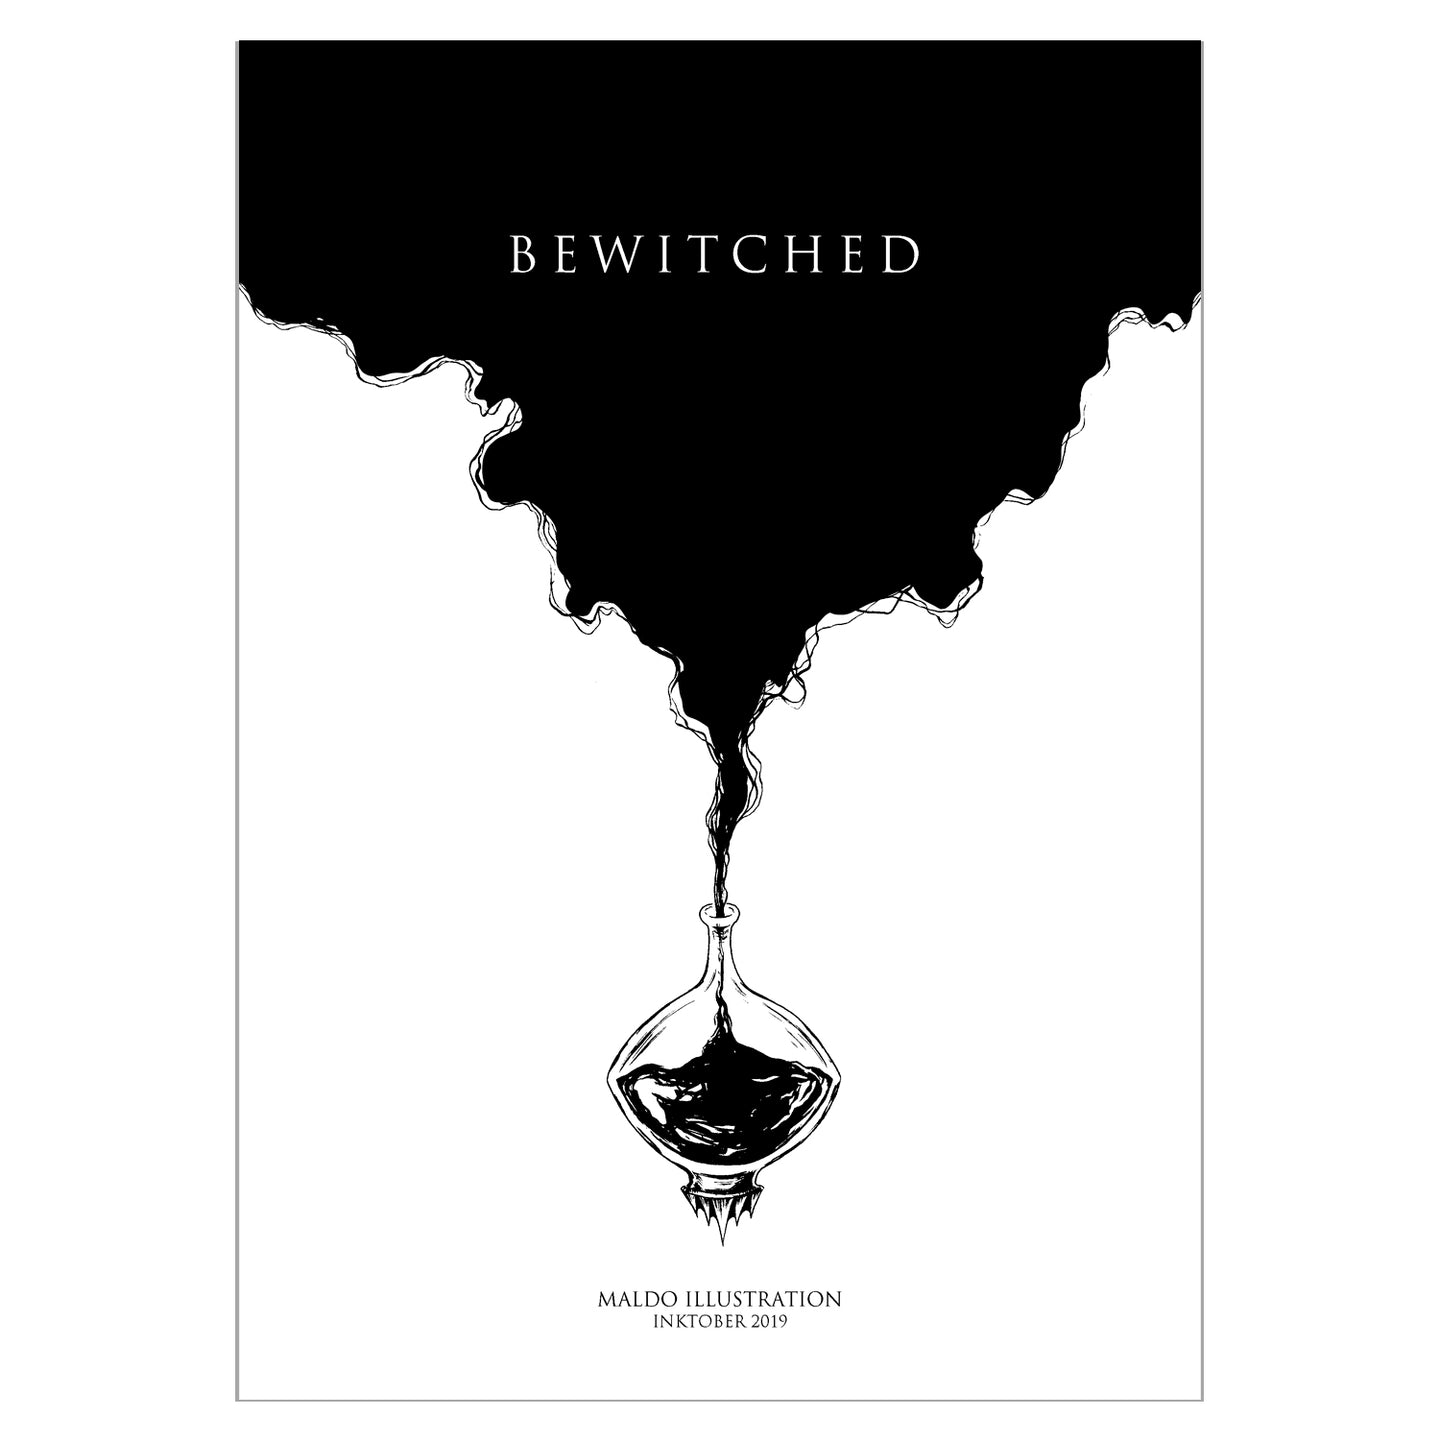 BEWITCHED - Inktober 2019 by Maldo illustration